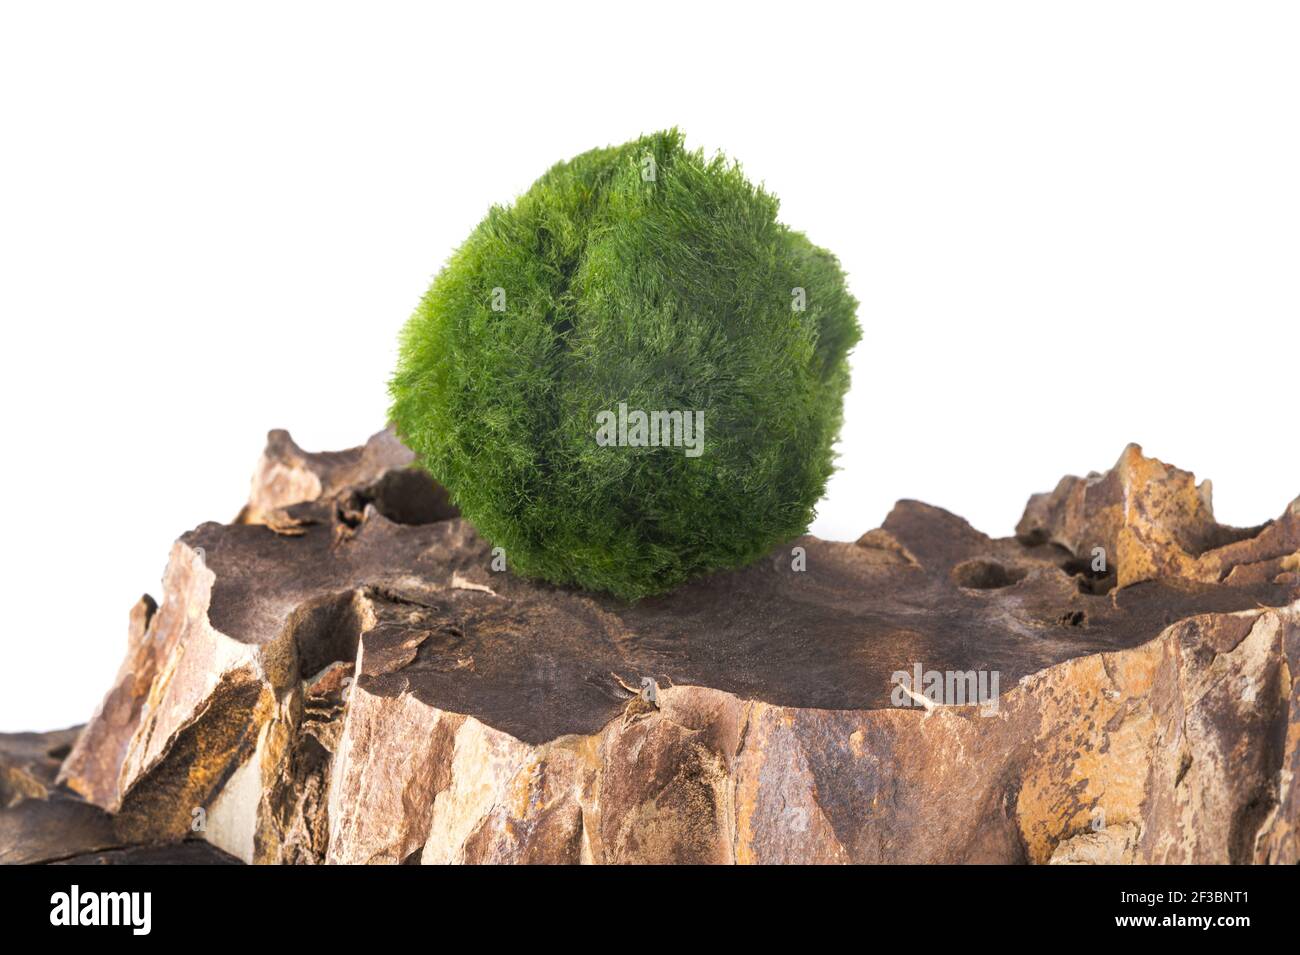 Moss balls on a rock isolated on white background Stock Photo